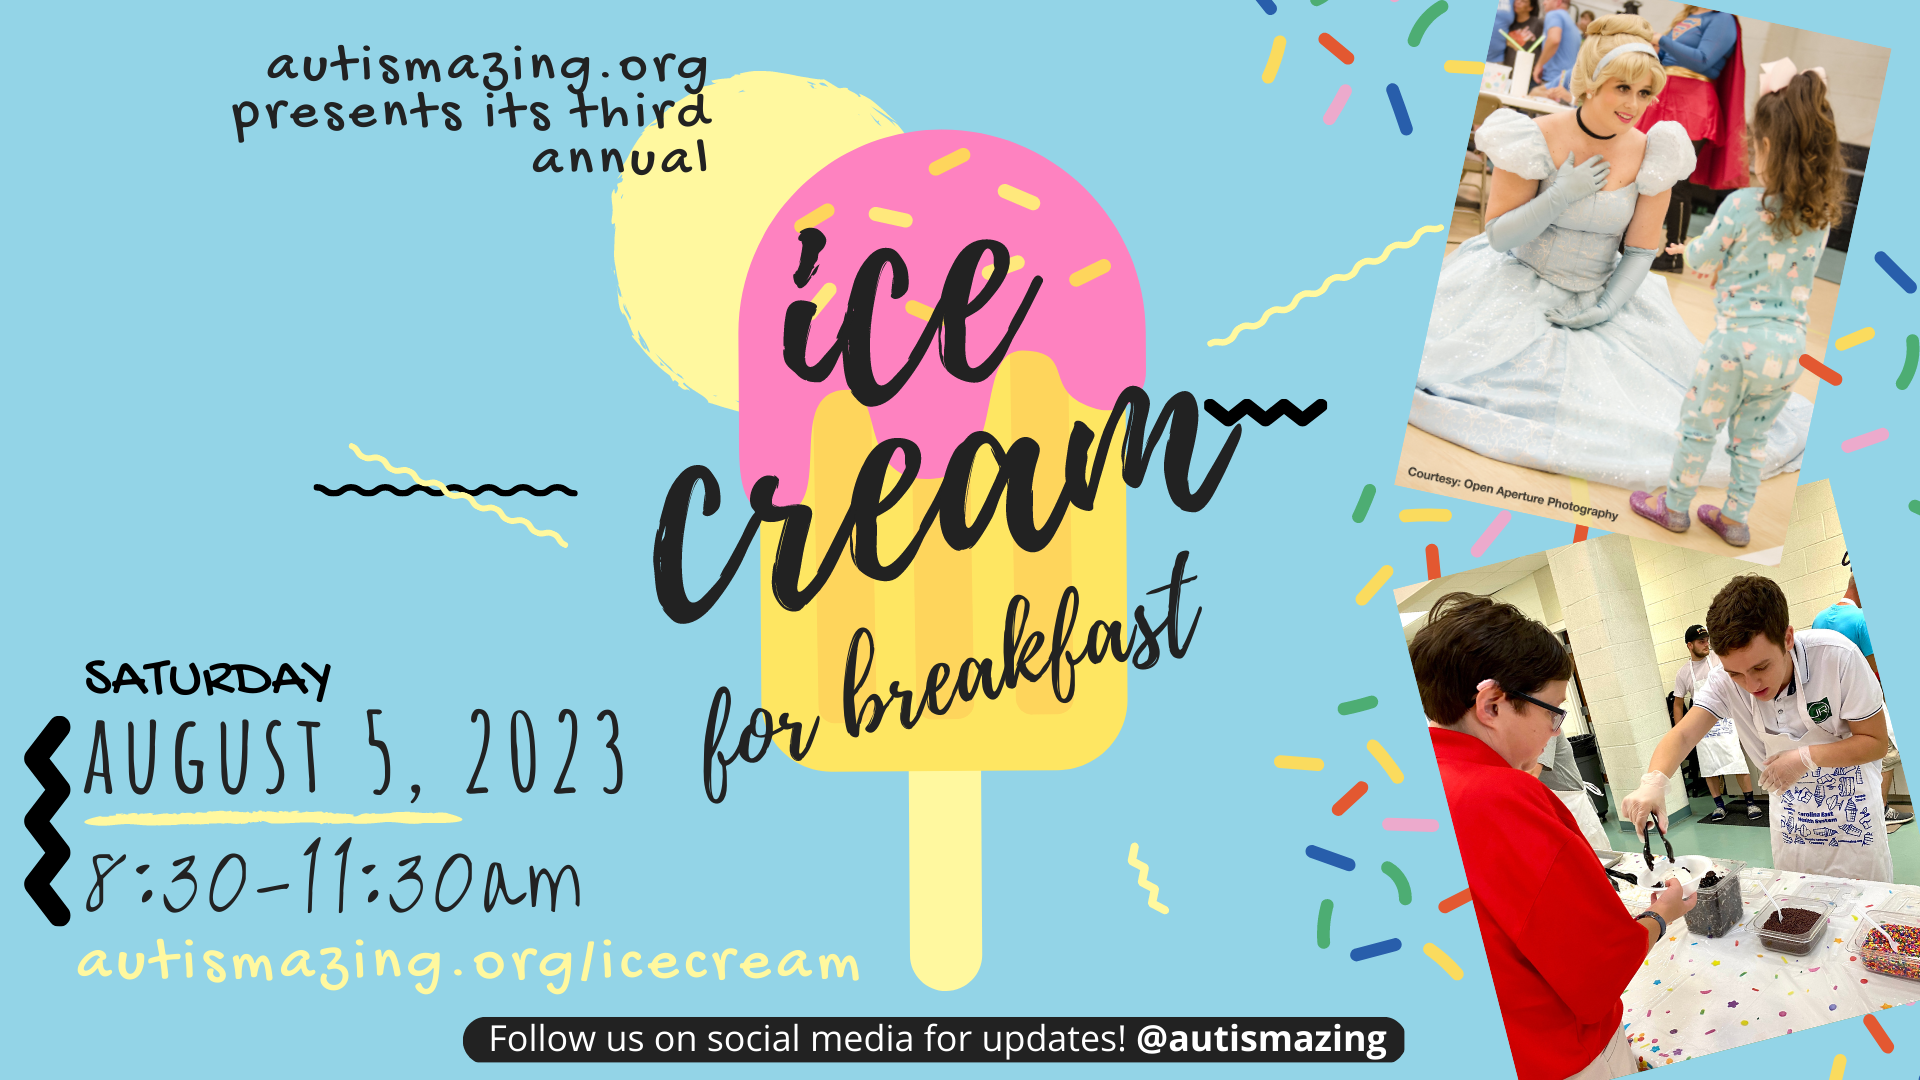 Autismazing.org’s 3rd Annual Ice Cream For Breakfast